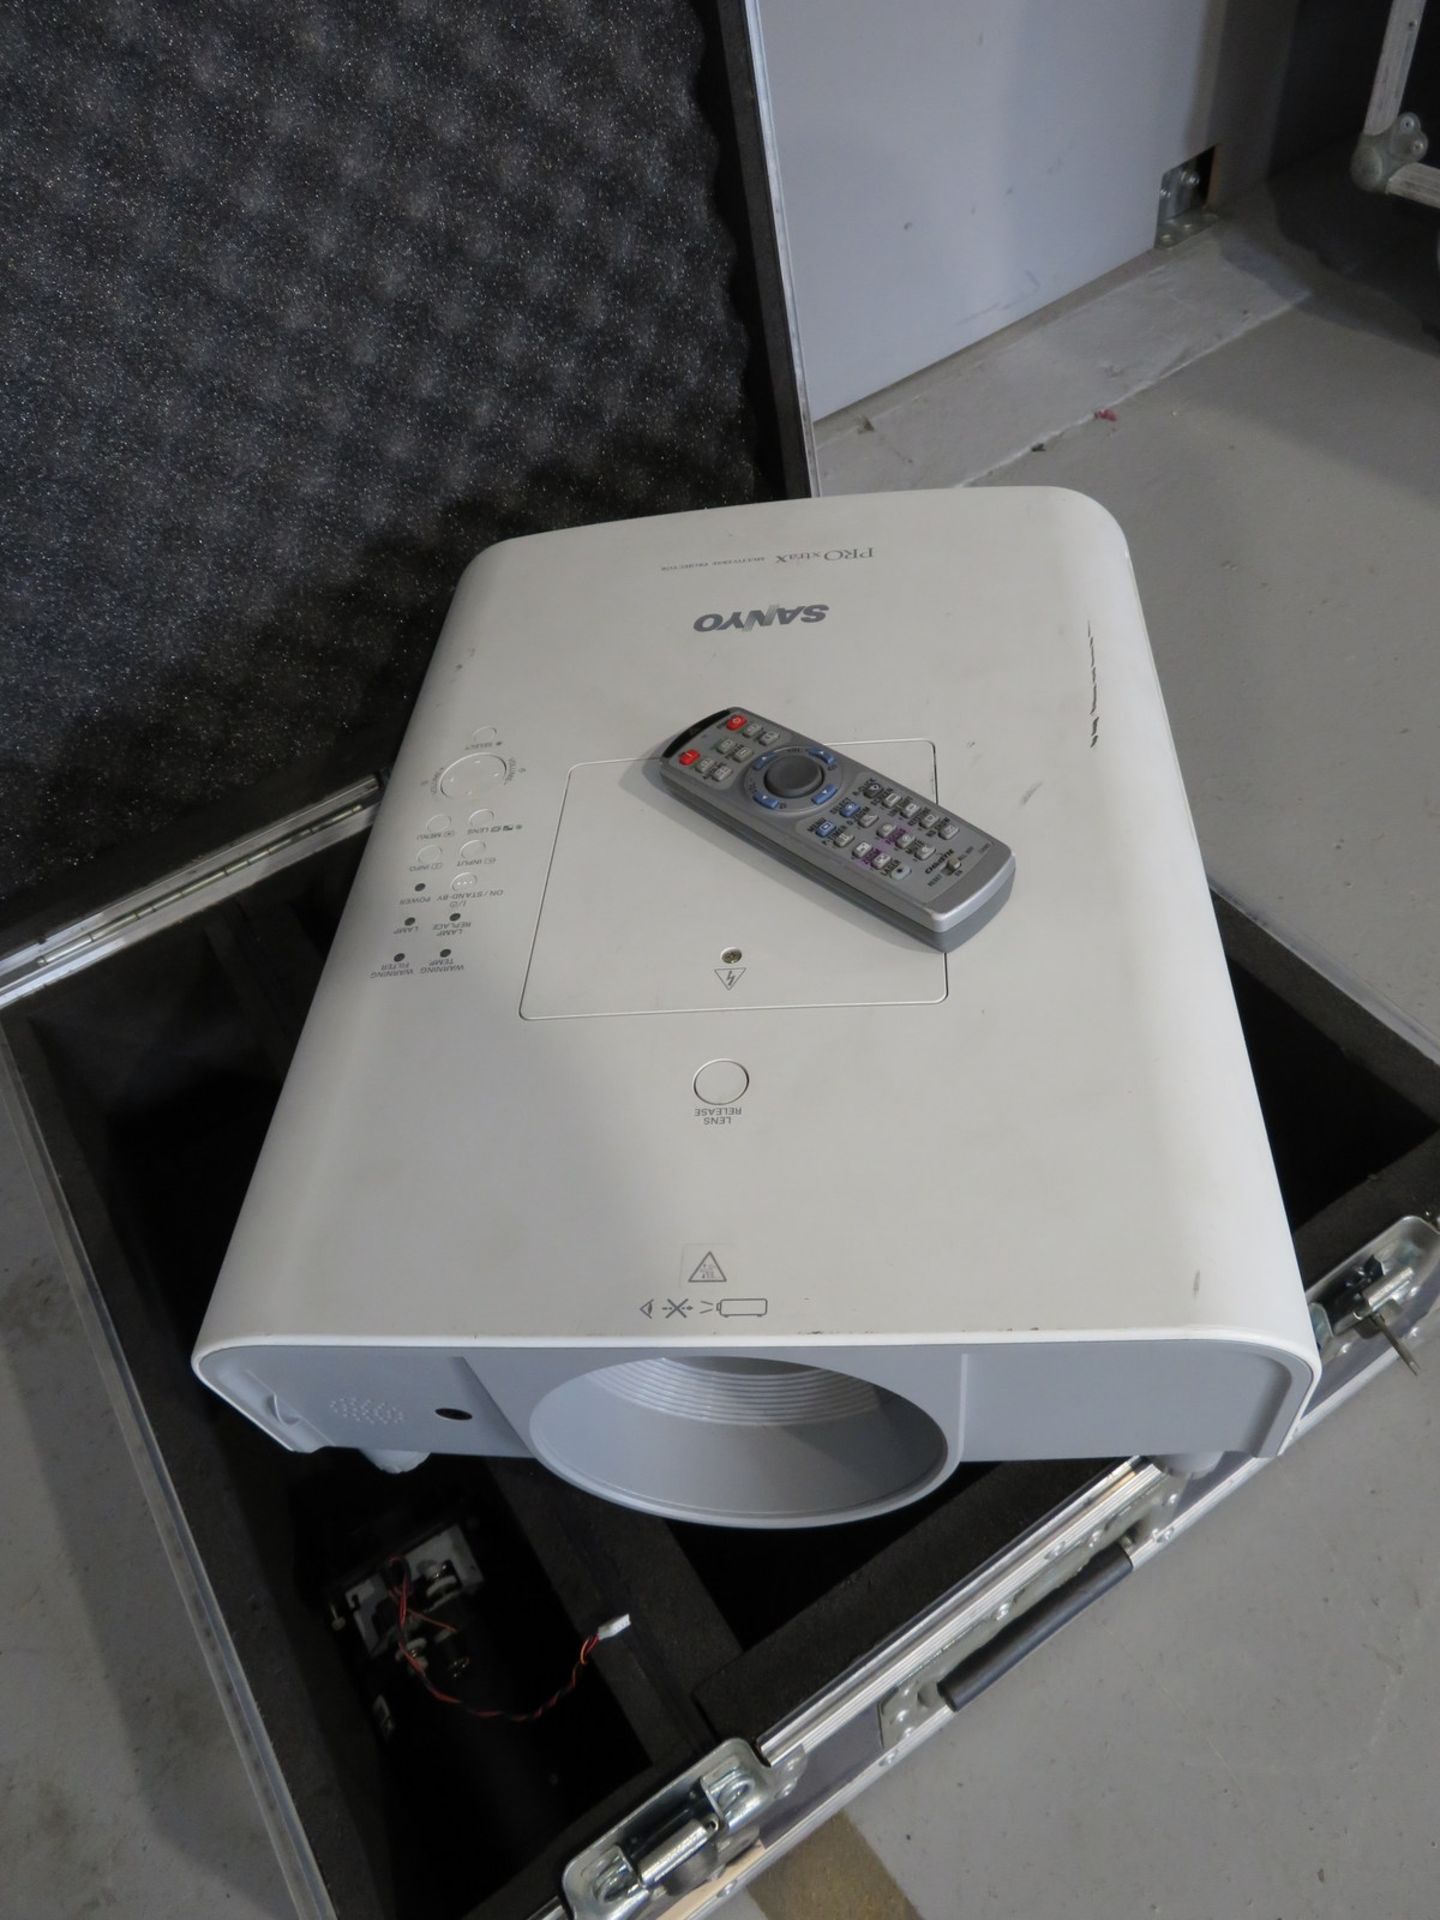 Sanyo XT25 Projector including lens in flightcase. Includes remote. Working condition. - Image 2 of 9